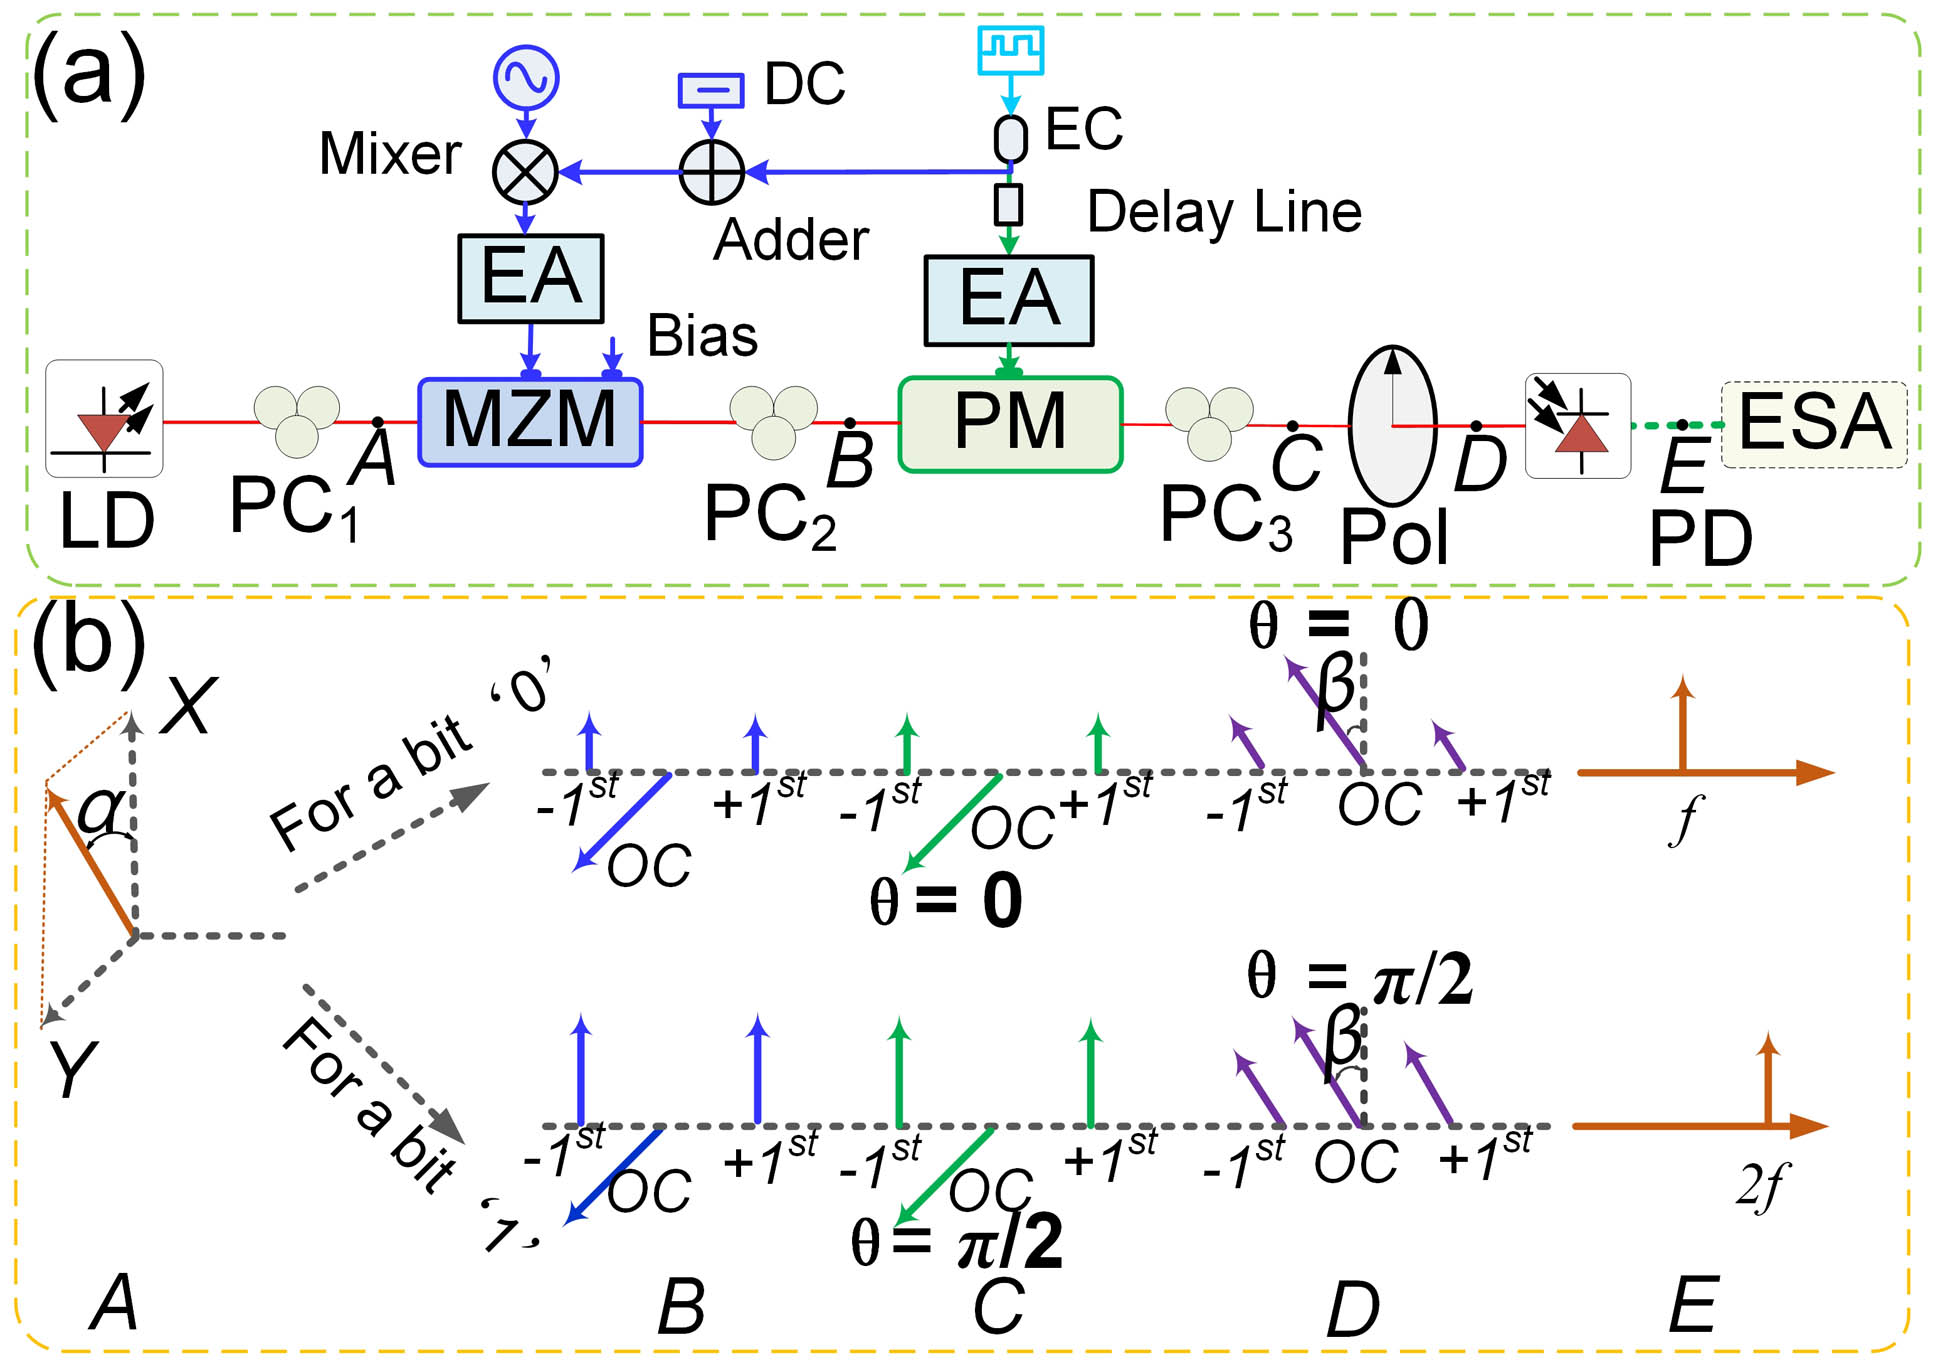 (a) Proposed schematic diagram for FSK signal generation based on CPS-DSB modulation. (b) Spectral evolution of the injected CW light wave at different positions in the system.